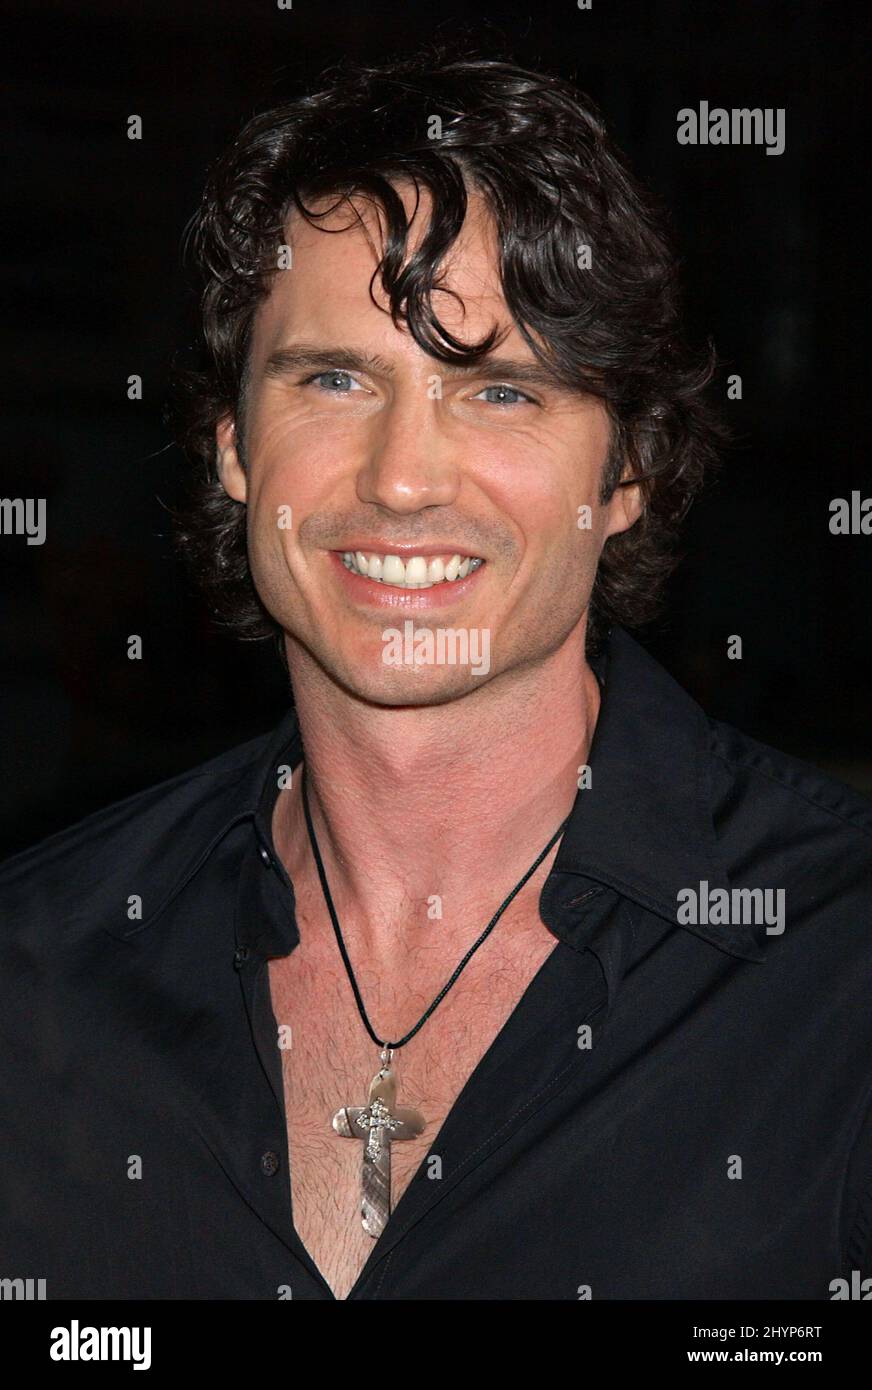 SHANE BROLLY ATTENDS THE 'UNDERWORLD' PREMIERE IN HOLLYWOOD. PICTURE: UK PRESS Stock Photo